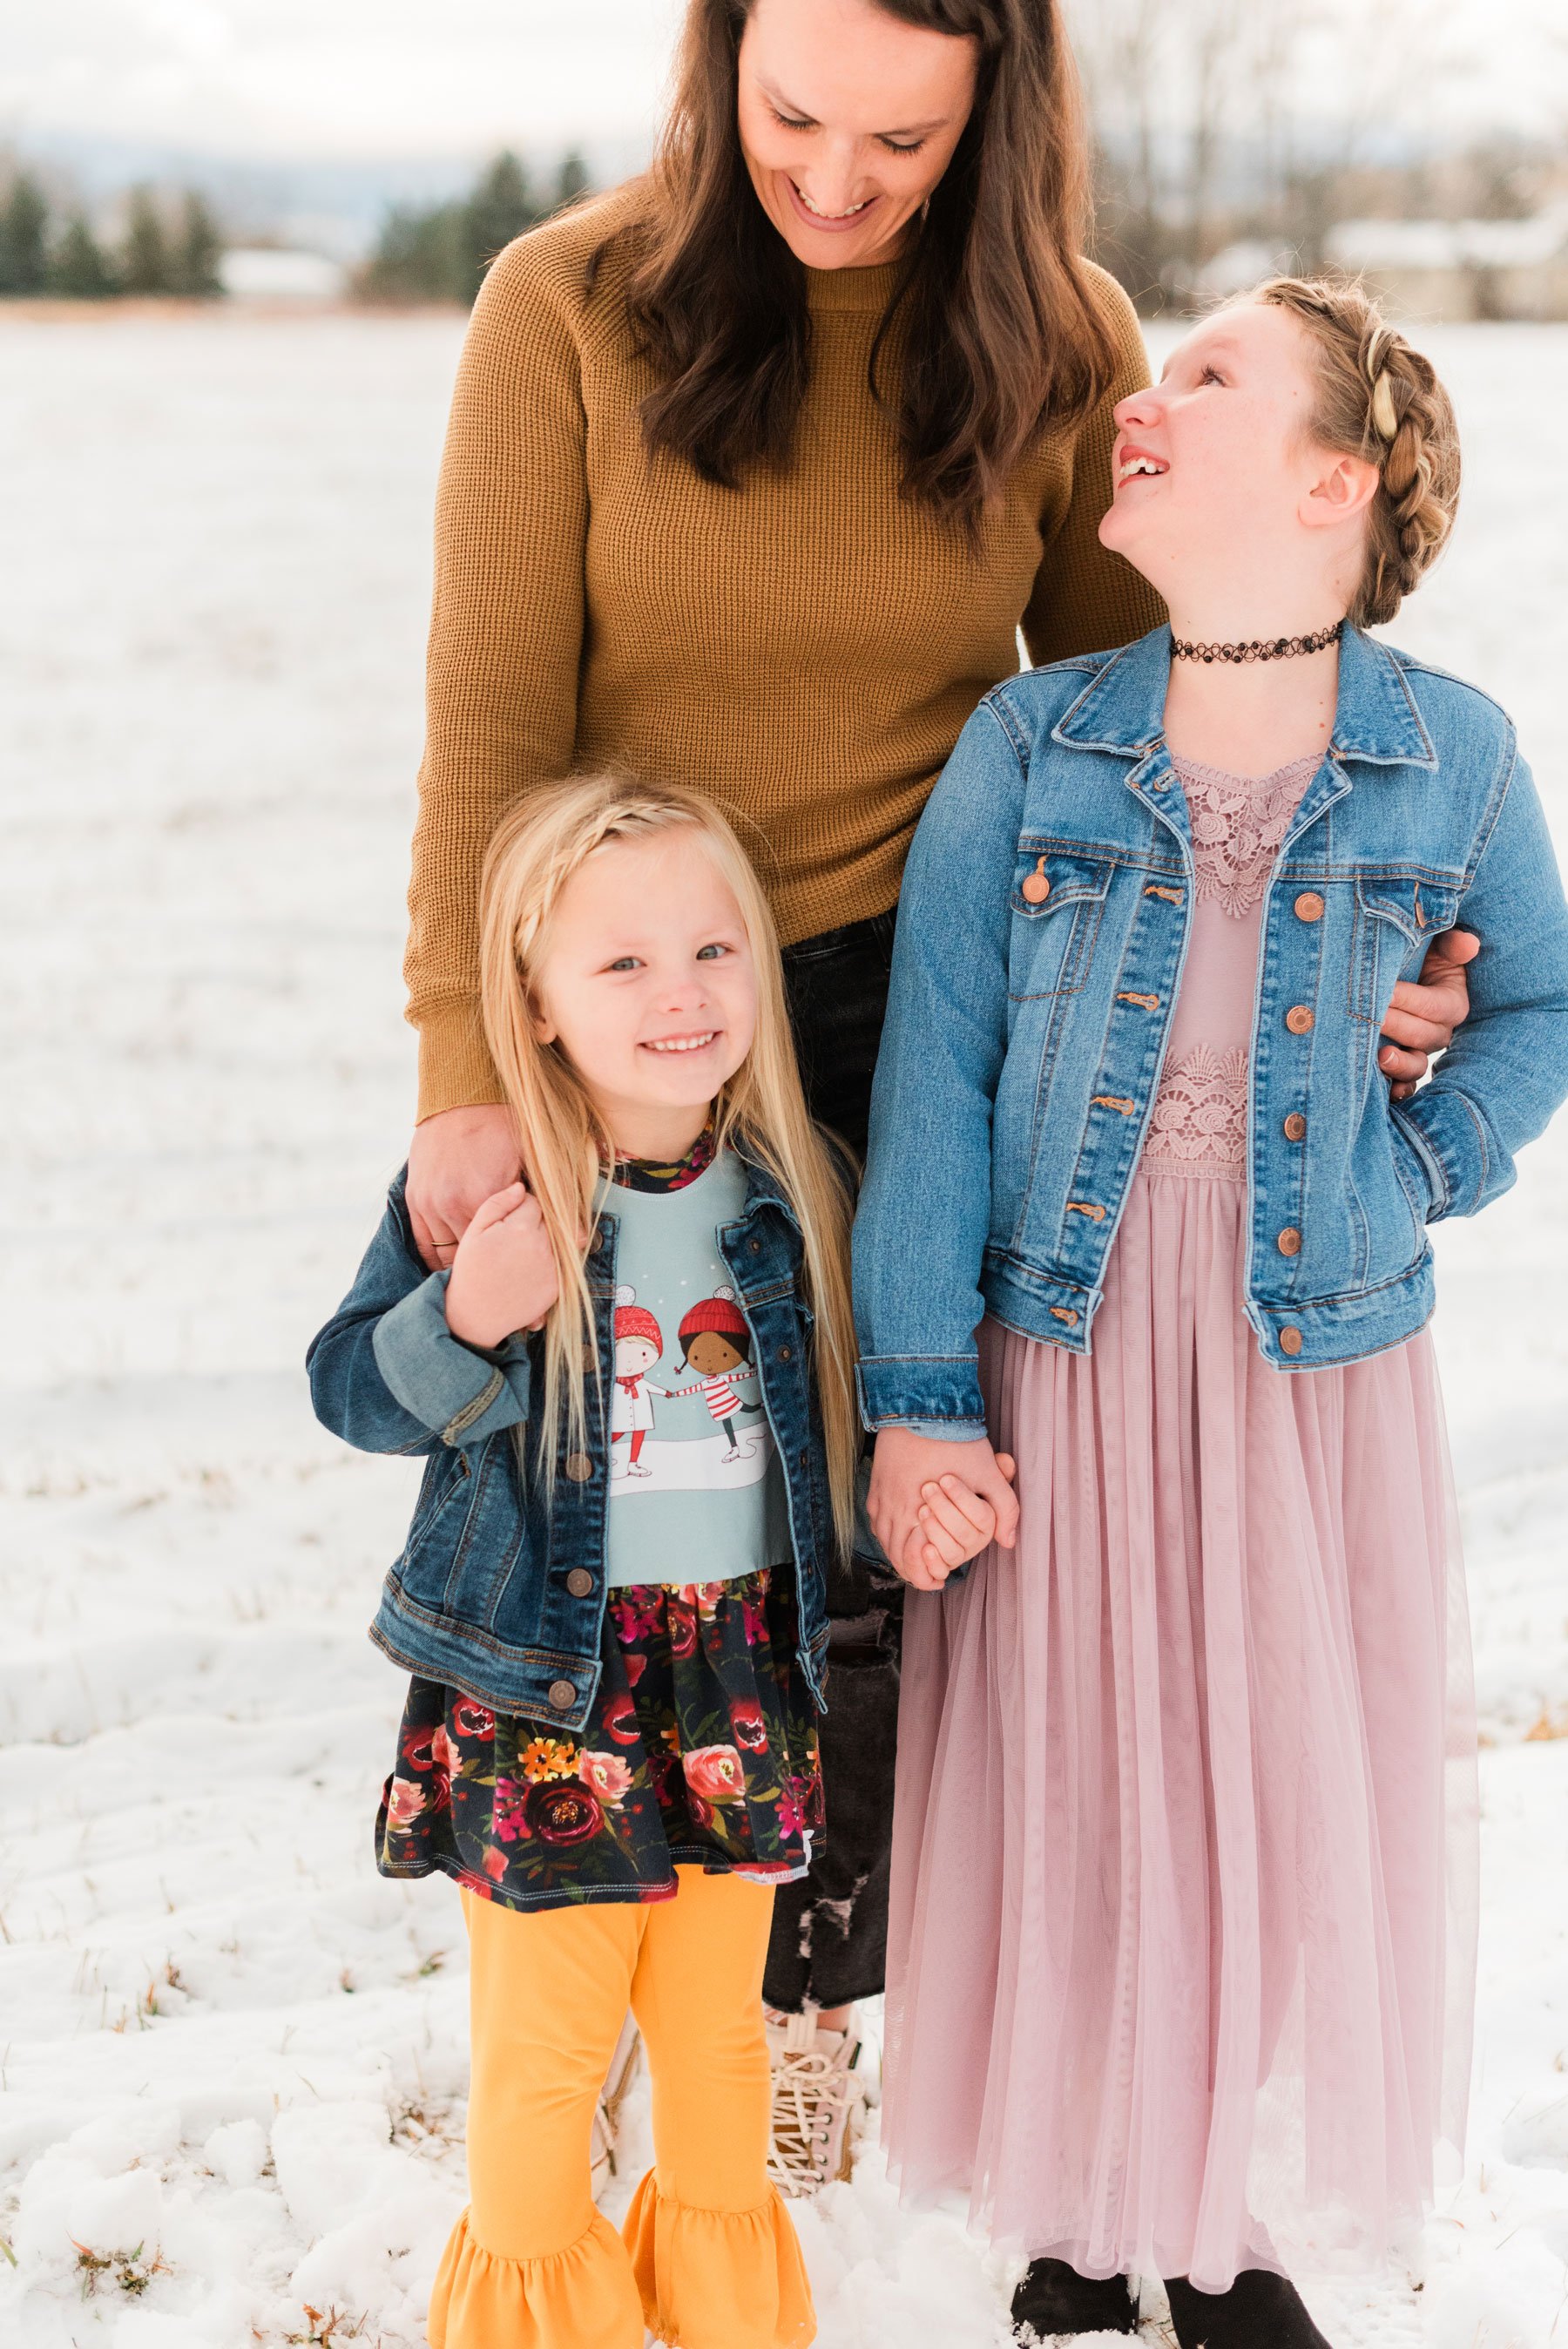  A mother and her two daughters smile at each other in a mommy and me photo session by Jacquie Erickson.&nbsp; Mother-daughter photos mini me mommy and me&nbsp; #motherdaughterphotos #FamilyPhotographyJourney #atlantafamilyphotographer #familiesofins